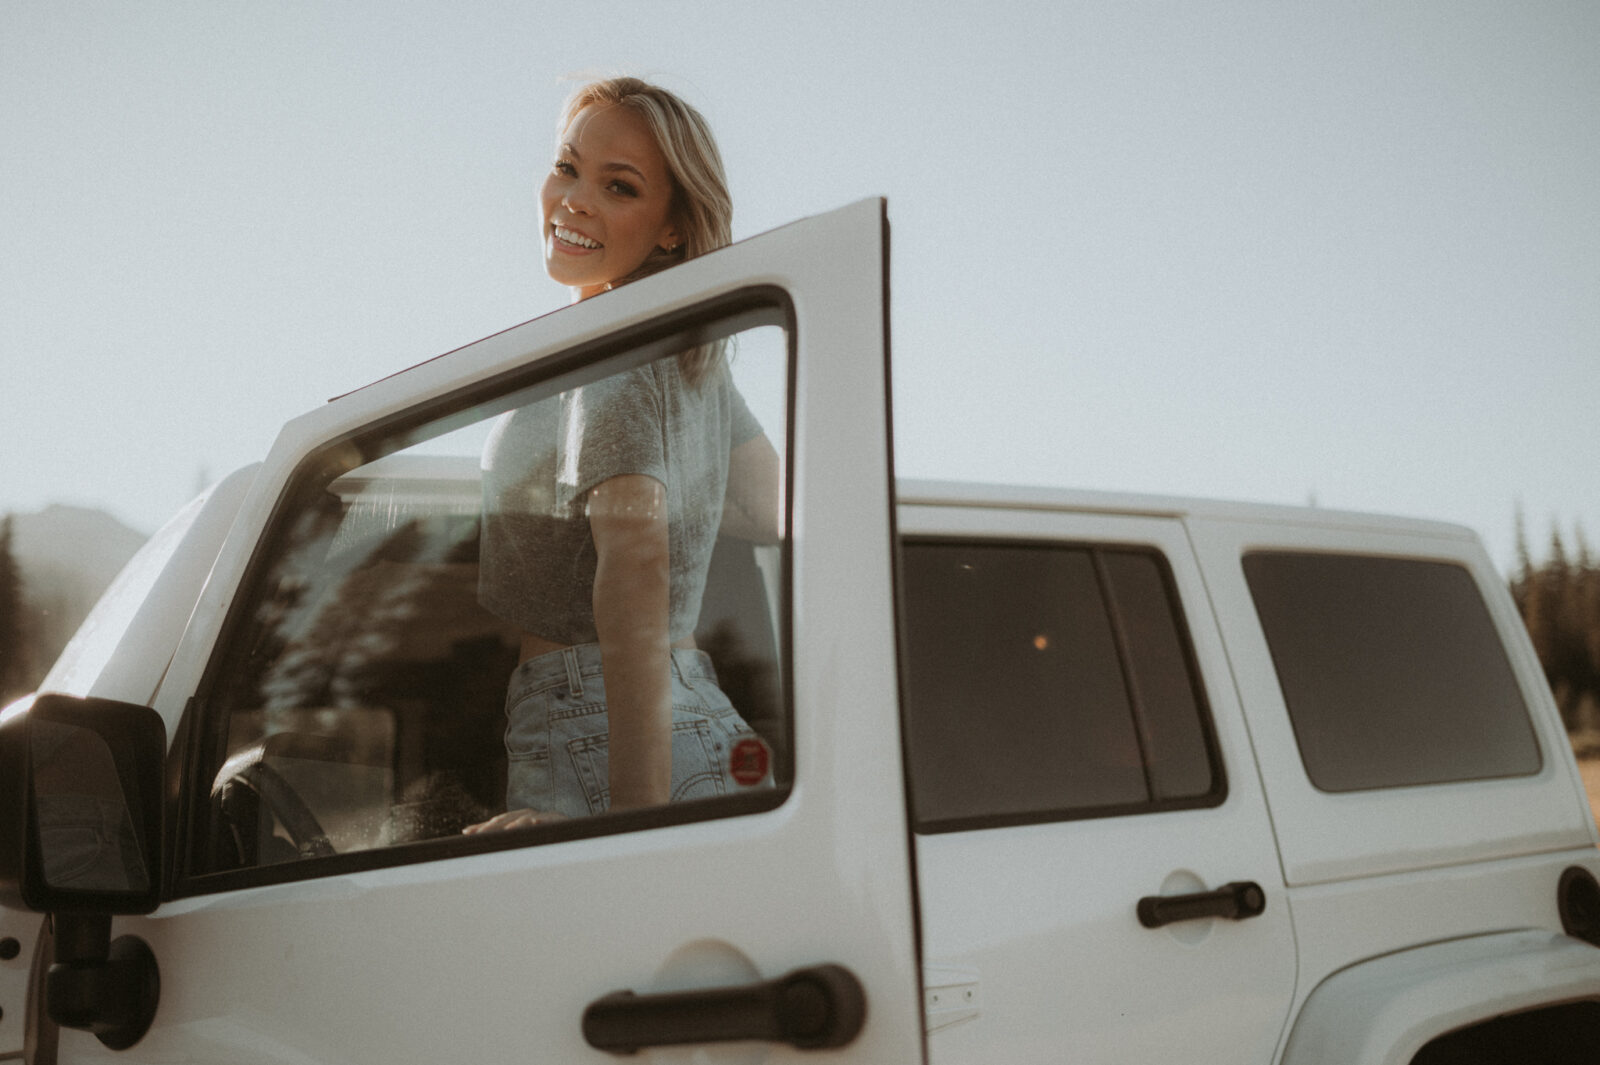 adventure summer senior pictures mountains mccall idaho jeep cars fun genuine real natural portraits makayla madden photography